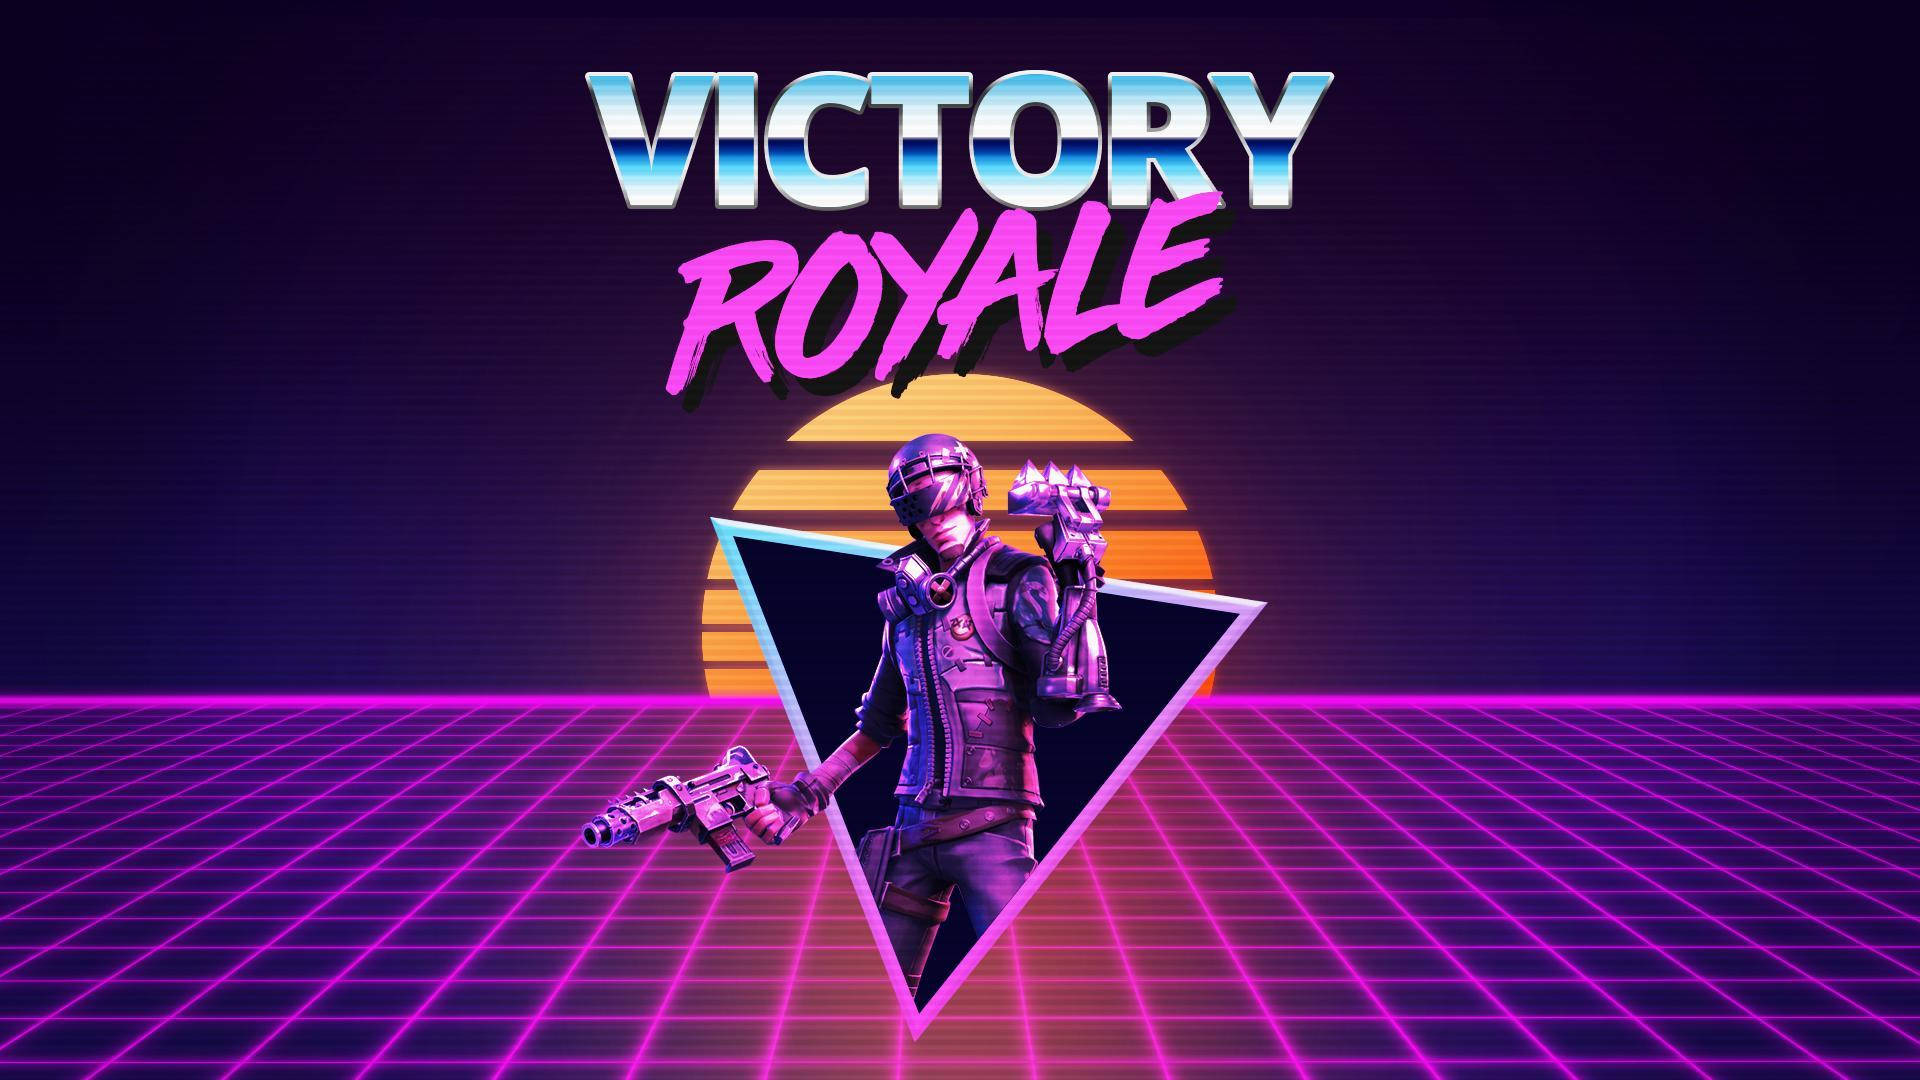 Cool Aesthetic Fortnite Victory Royale